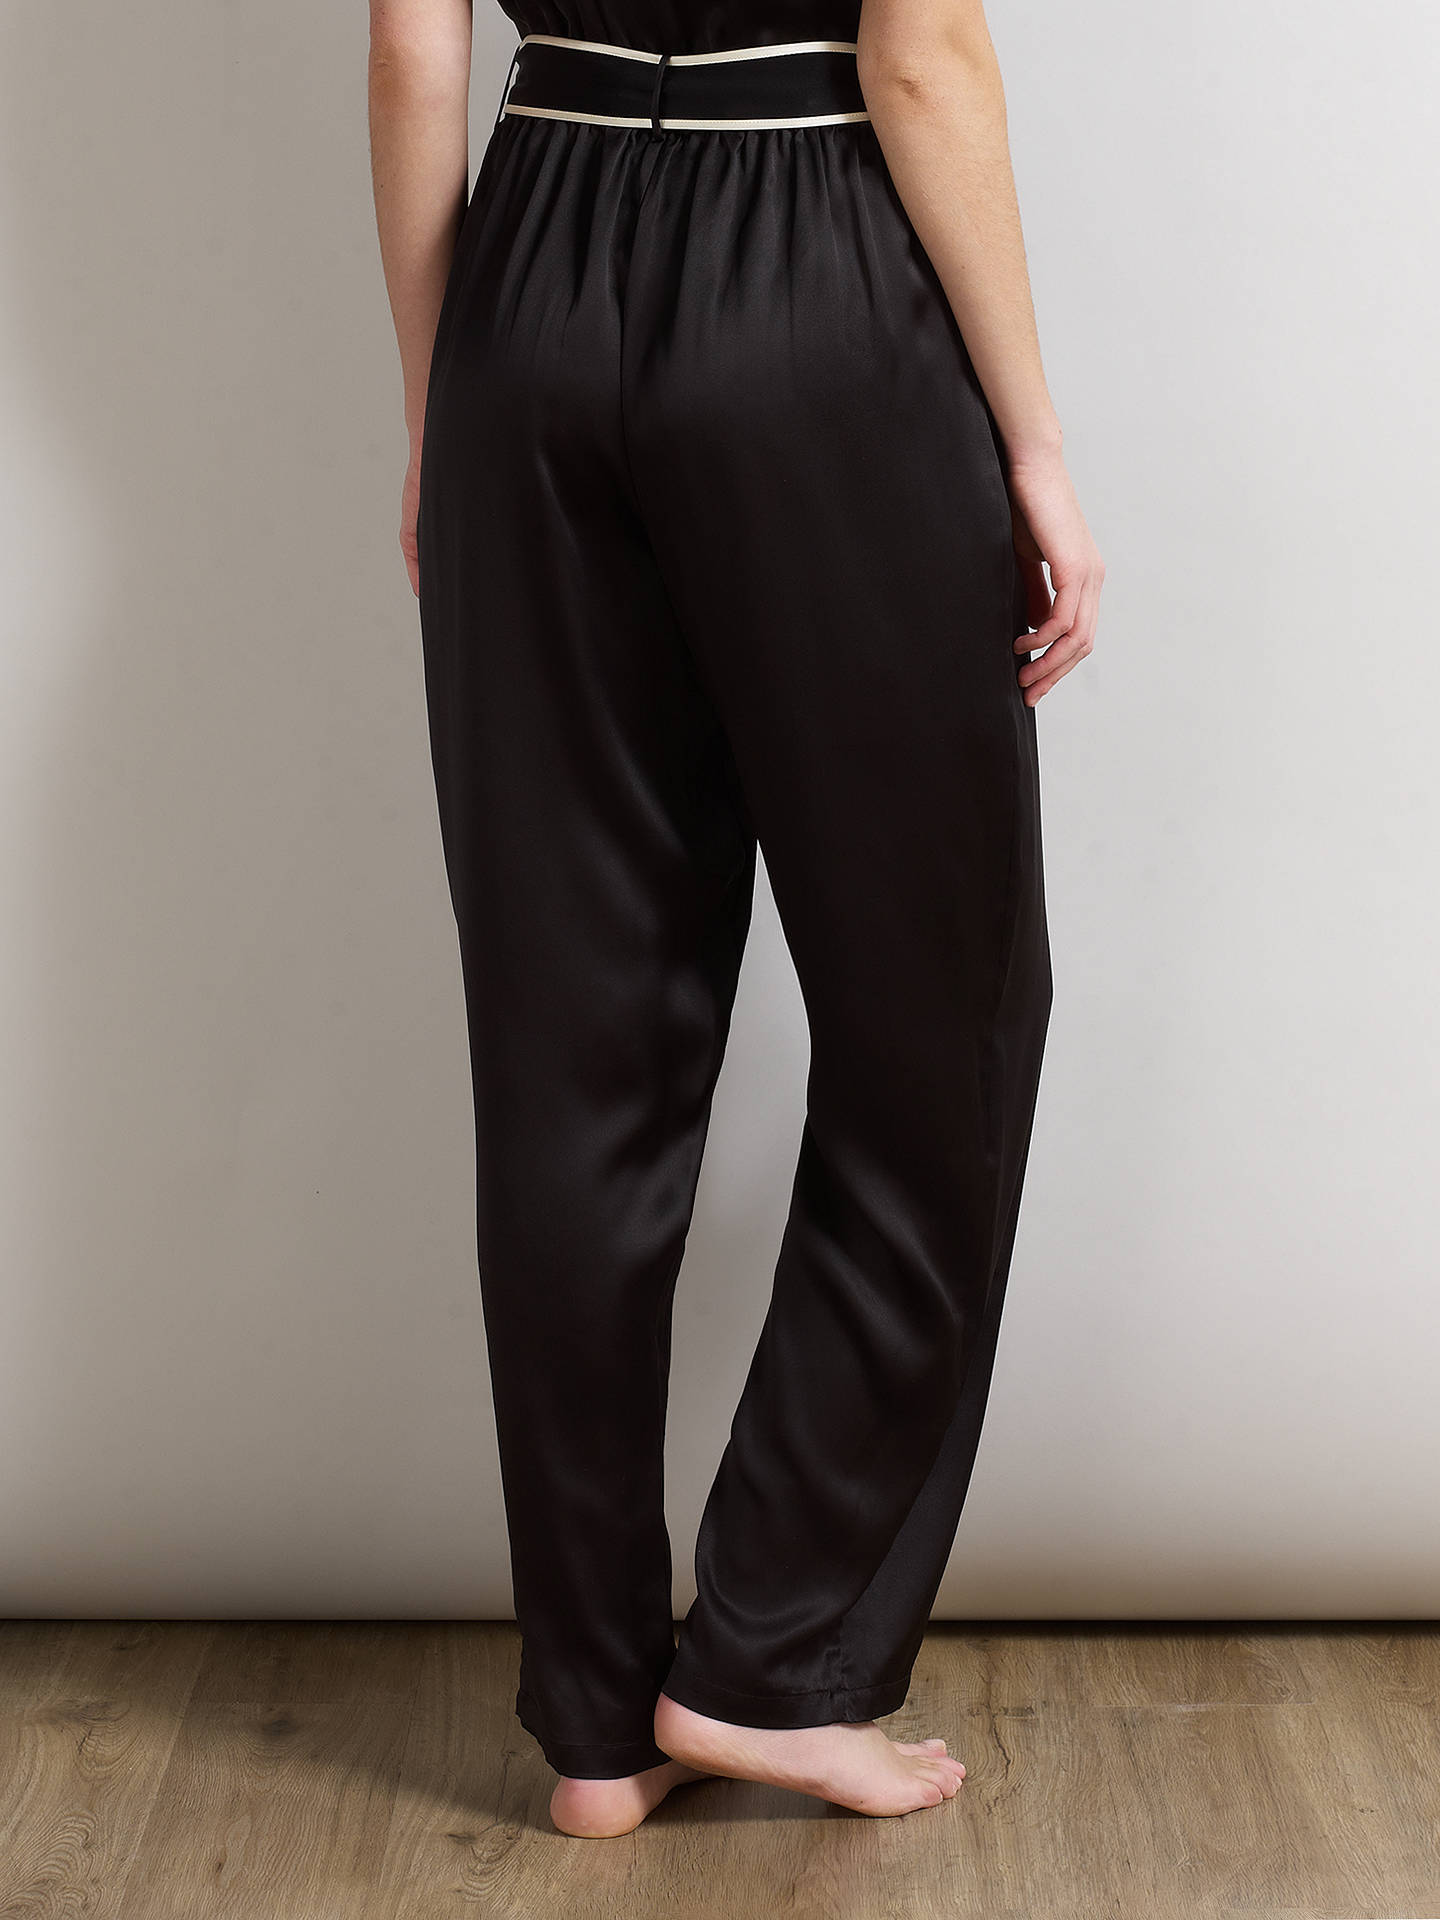 Somerset by Alice Temperley Tuxedo Jumpsuit, Black at John Lewis & Partners